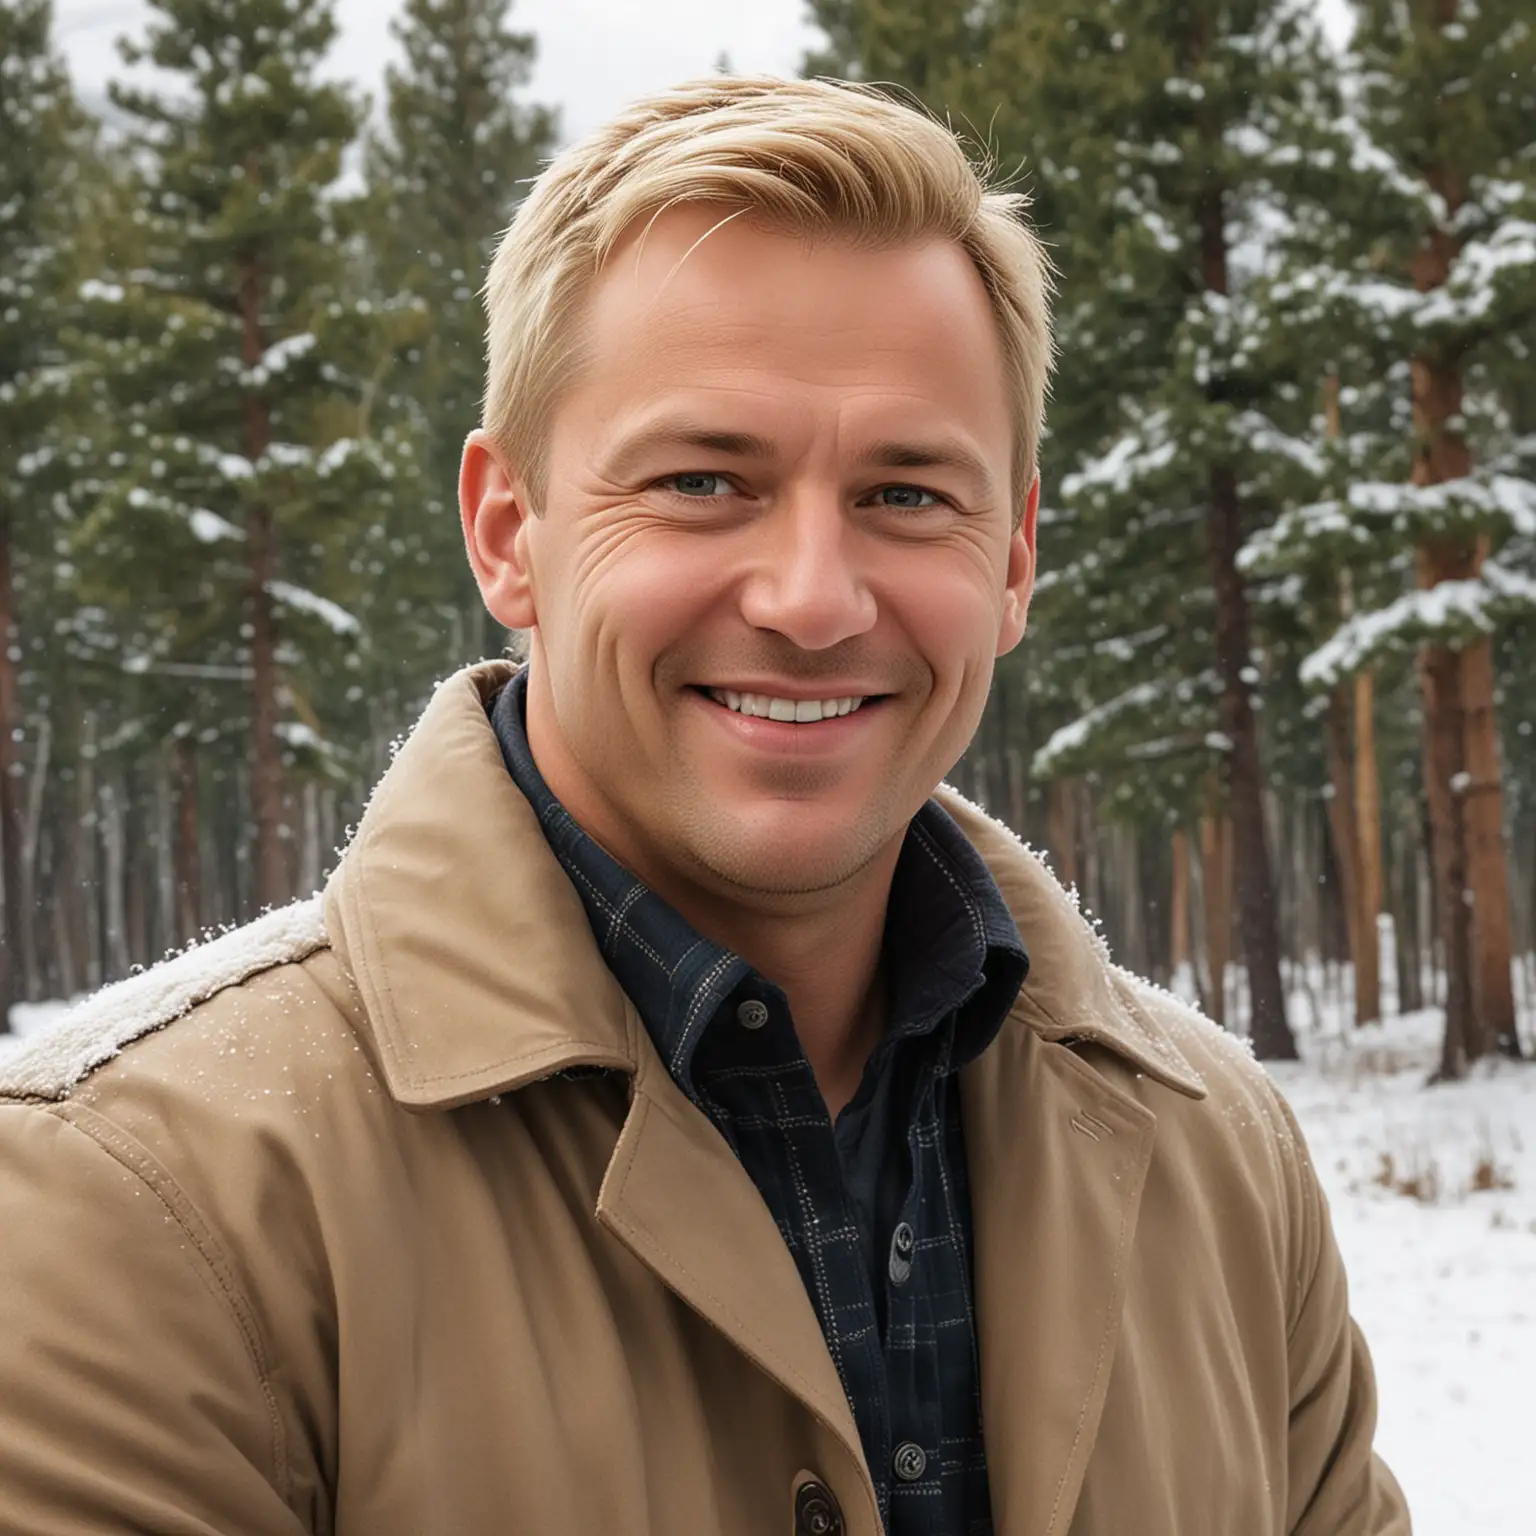 Show me a photo-realistic 49-year-old blond male of Scottish, English, German, and Norwegian descent with short hair on top, buzzed hair on the sides, and really dark brown eyes. He is moderately overweight. He has a full face with a receding hairline and is smiling slightly. He is outside wearing a coat in the wintertime, sitting on a park bench with snow-covered pine trees and mountains in the background.